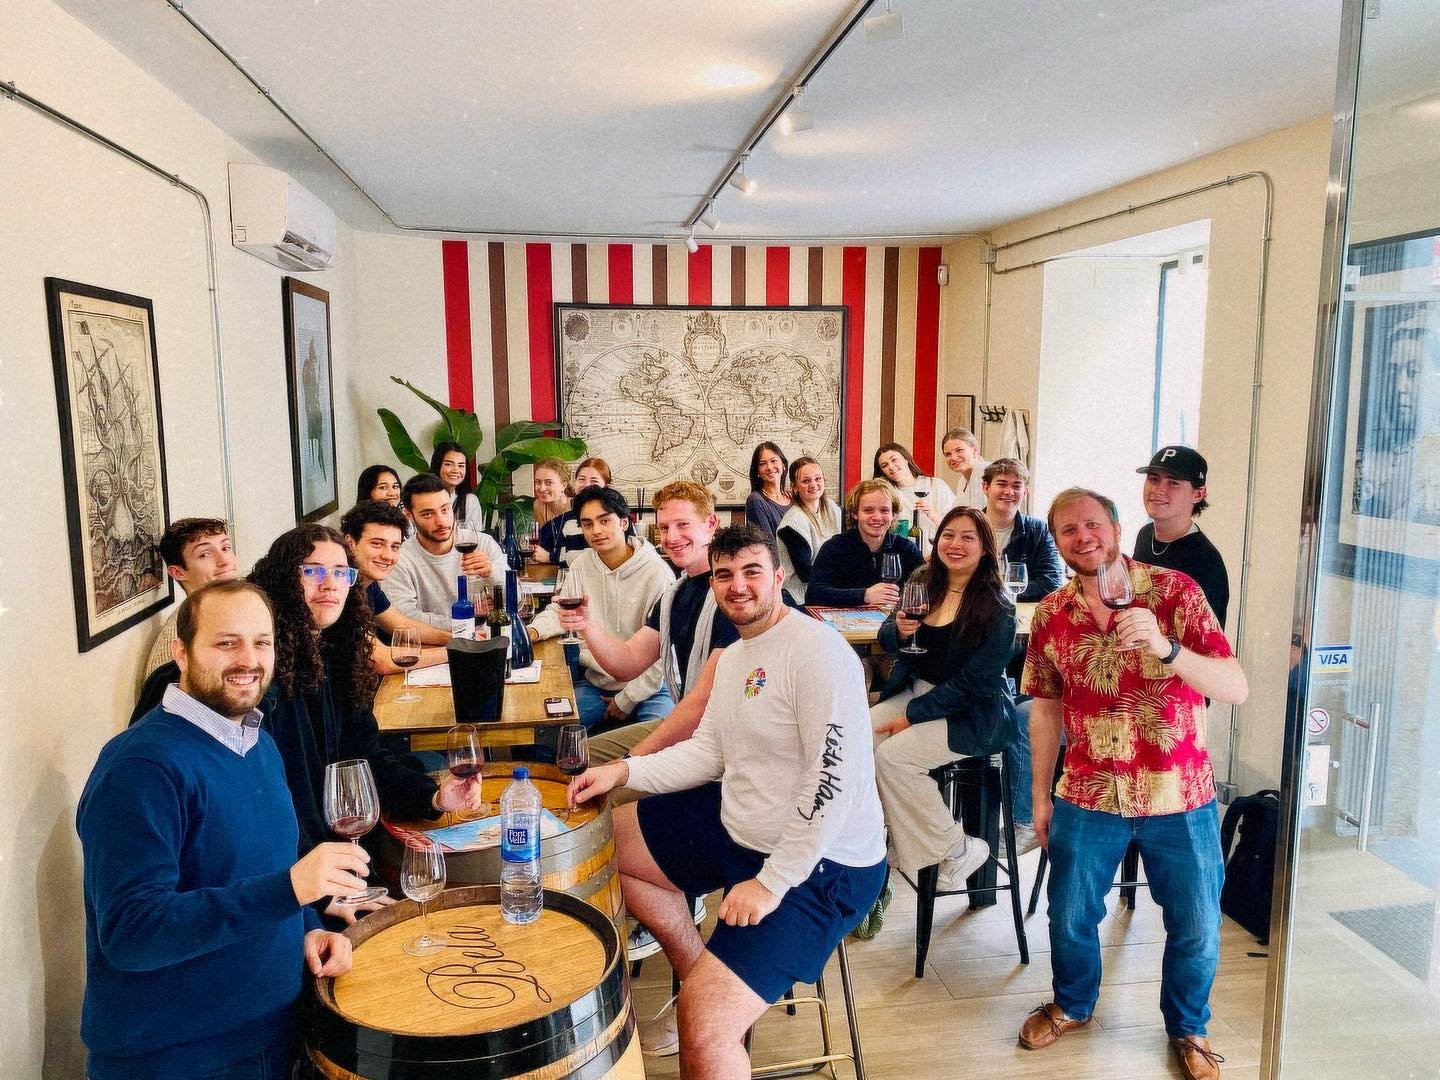 Yesterday we welcomed lots of students from @cieemadrid to give them fun and informative tastings about Spanish wines and how to taste vino properly! Really lovely bunch of interested and intelligent new drinkers! // Ayer recibimos a un mont&oacute;n